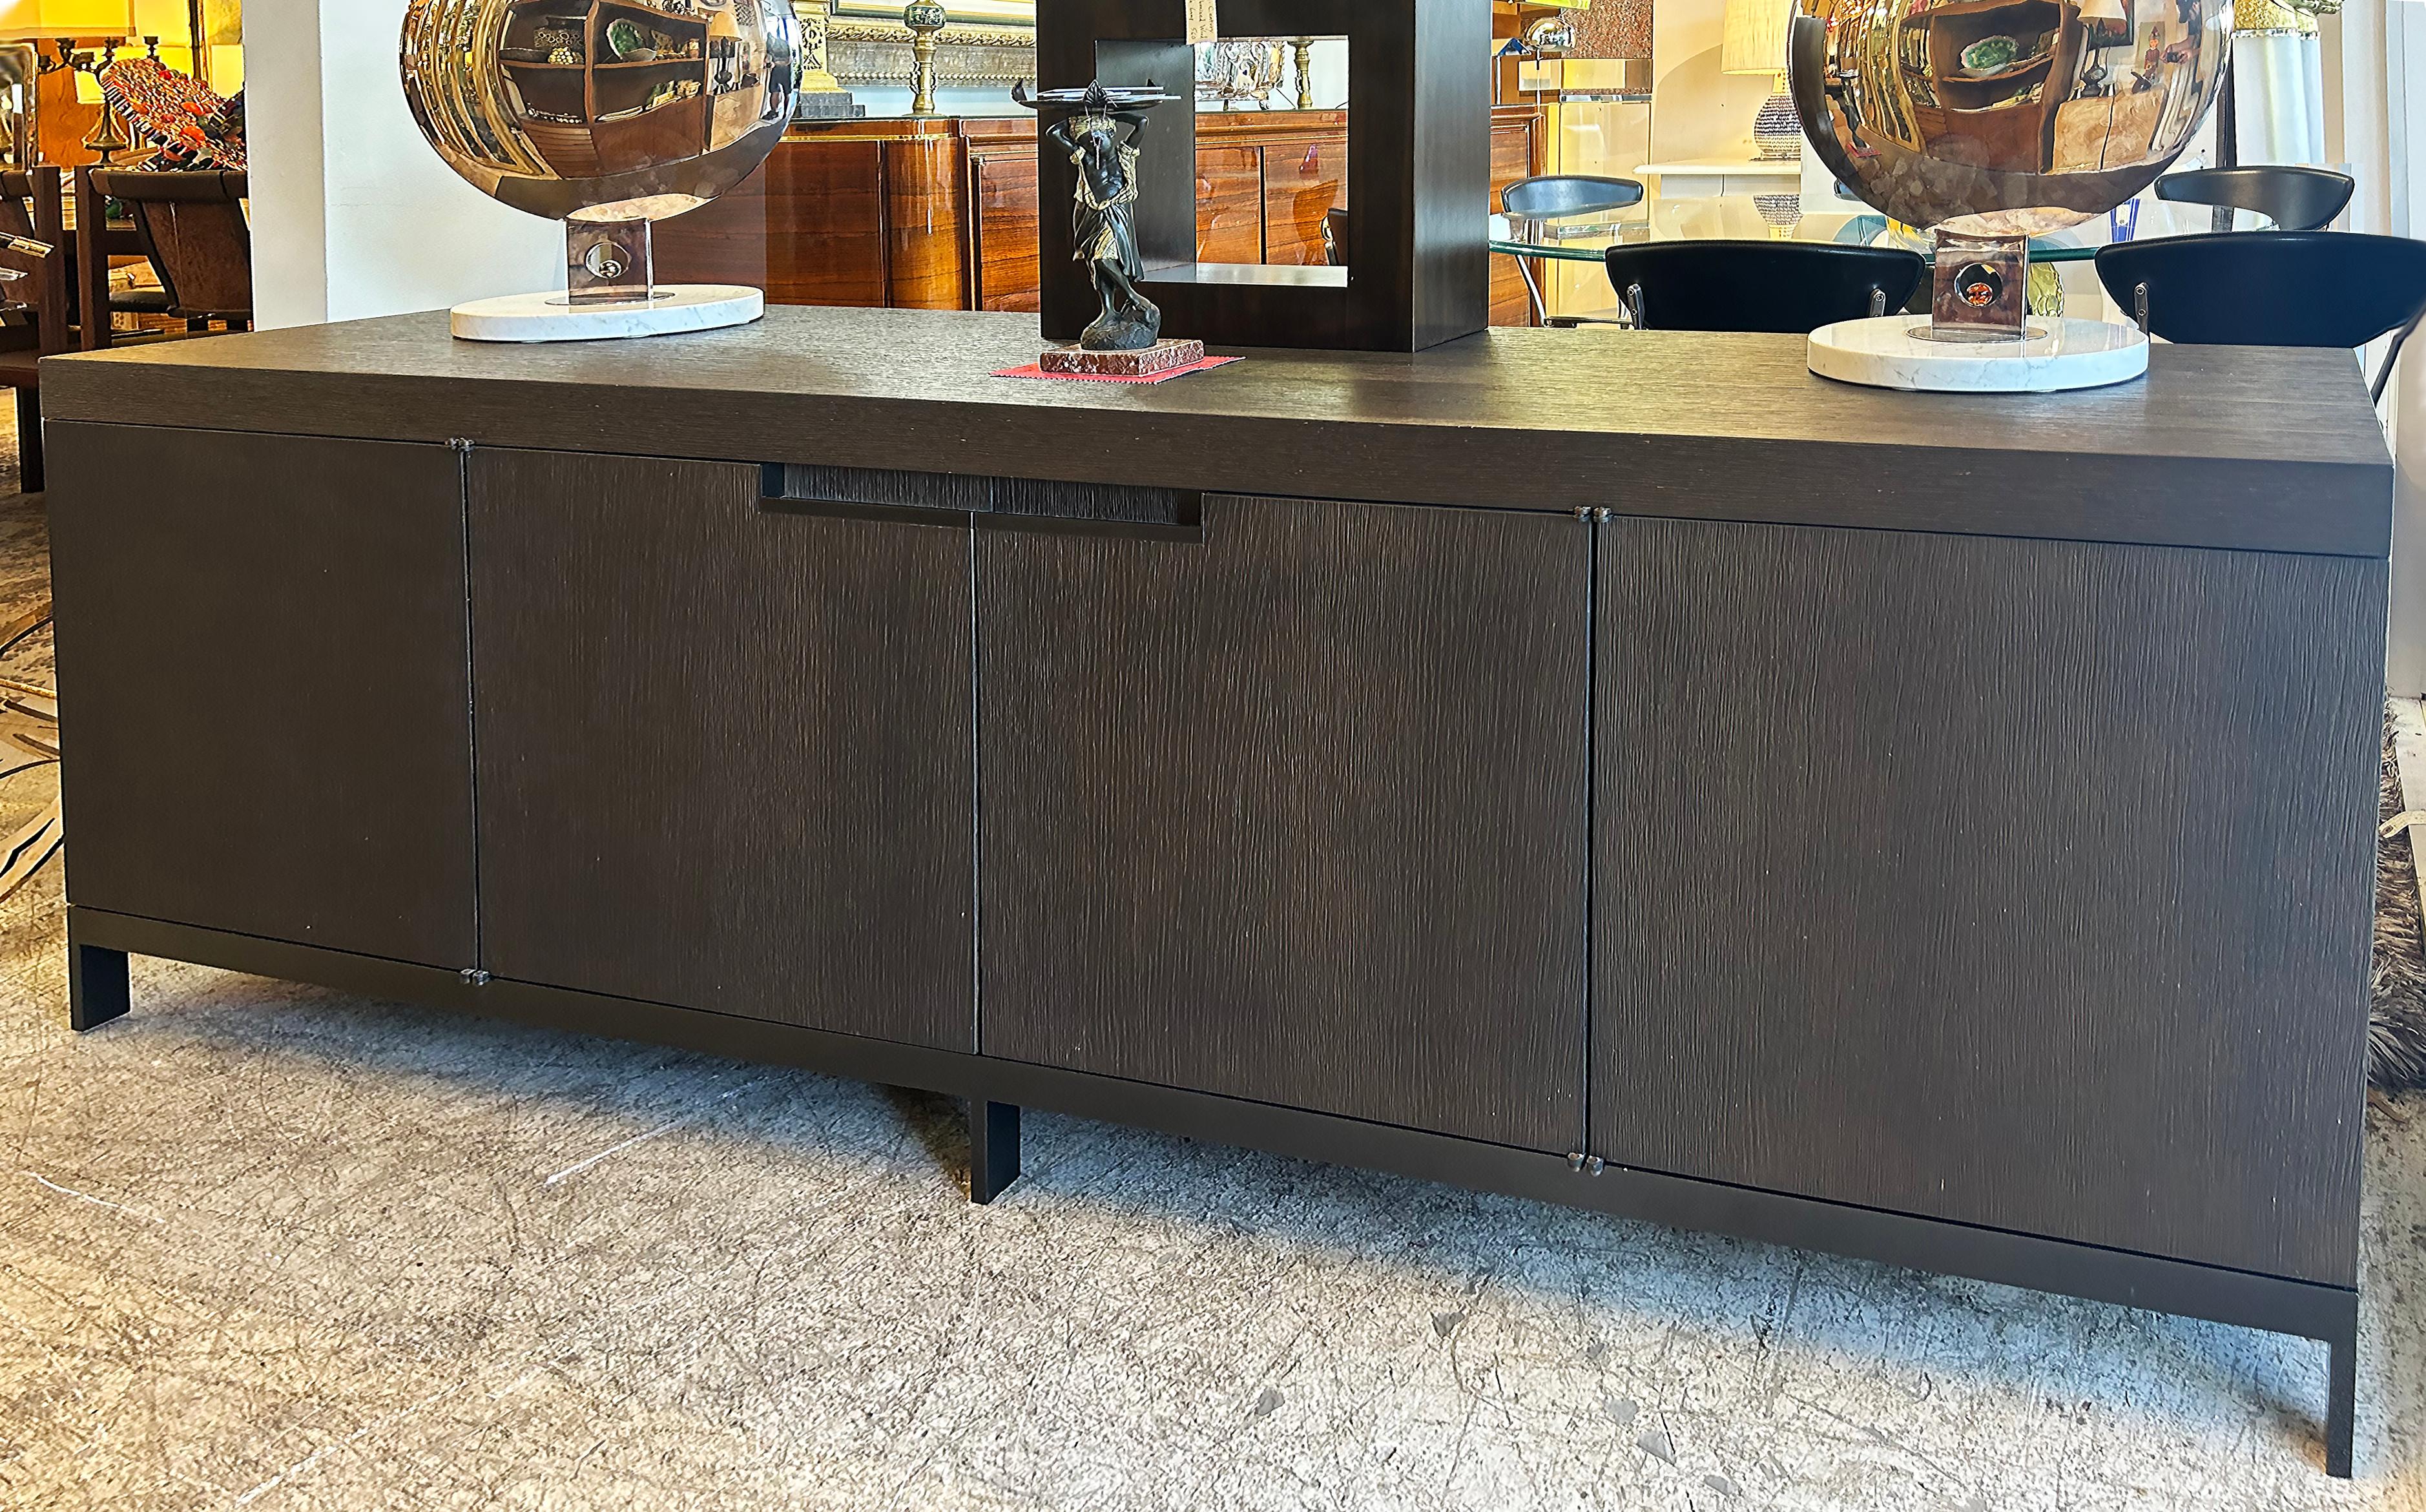 Christian Liaigre Tangris Credenza Cabinet, Sandblasted Oak and Metal

Offered for sale is a Christian Liaigre 